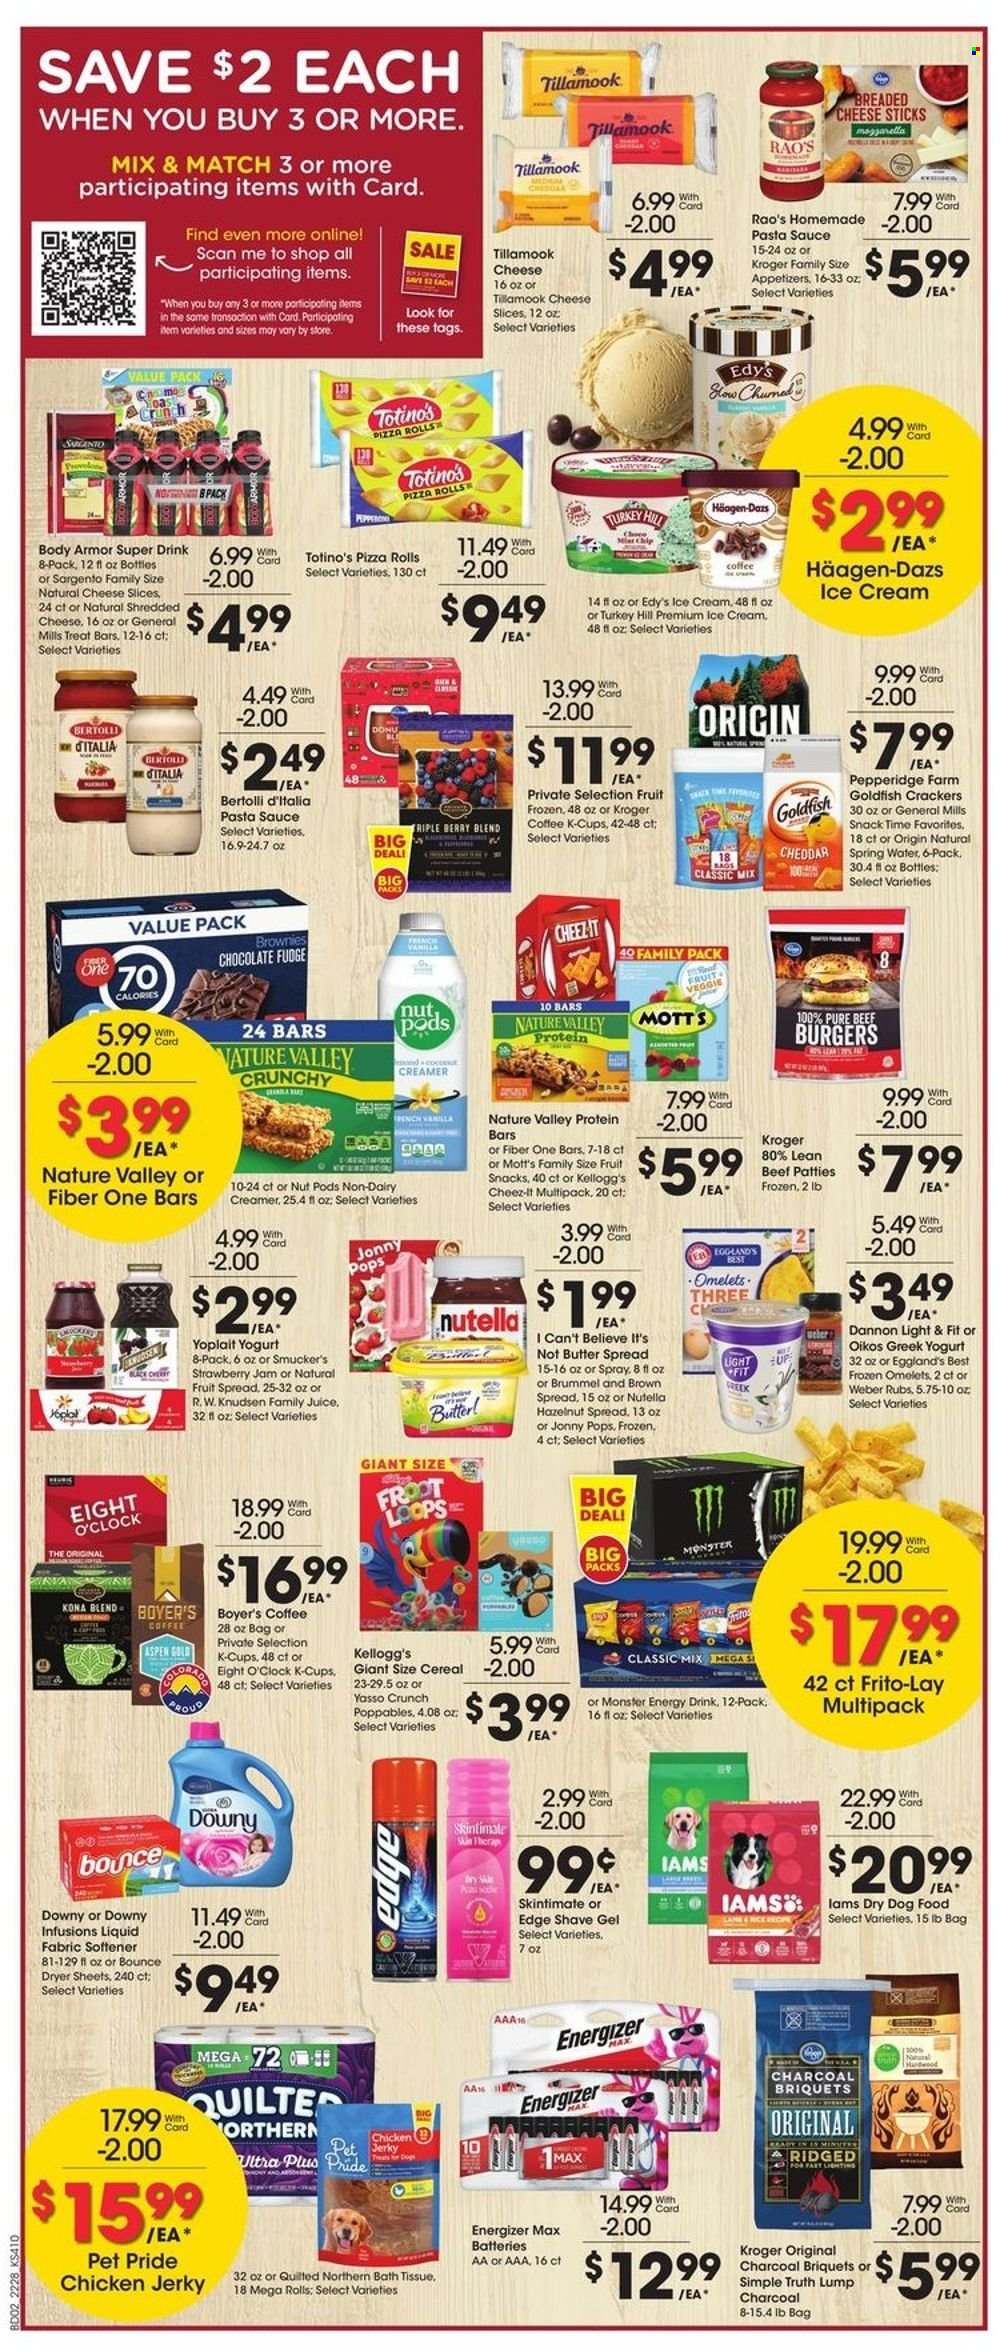 thumbnail - City Market Flyer - 08/10/2022 - 08/16/2022 - Sales products - pizza rolls, brownies, Mott's, pizza, pasta sauce, hamburger, sauce, beef burger, Bertolli, jerky, shredded cheese, sliced cheese, Sargento, greek yoghurt, yoghurt, Oikos, Yoplait, Dannon, butter, I Can't Believe It's Not Butter, non dairy creamer, creamer, ice cream, Häagen-Dazs, cheese sticks, fudge, Nutella, crackers, Kellogg's, fruit snack, Goldfish, Frito-Lay, Cheez-It, strawberry jam, cereals, protein bar, Nature Valley, Fiber One, fruit jam, hazelnut spread, juice, Body Armor, energy drink, Monster, Monster Energy, spring water, coffee, coffee capsules, K-Cups, Eight O'Clock, beef meat, bath tissue, Quilted Northern, fabric softener, Bounce, dryer sheets, Downy Laundry, shave gel, battery, Energizer, animal food, dry dog food, dog food, Iams, charcoal. Page 2.